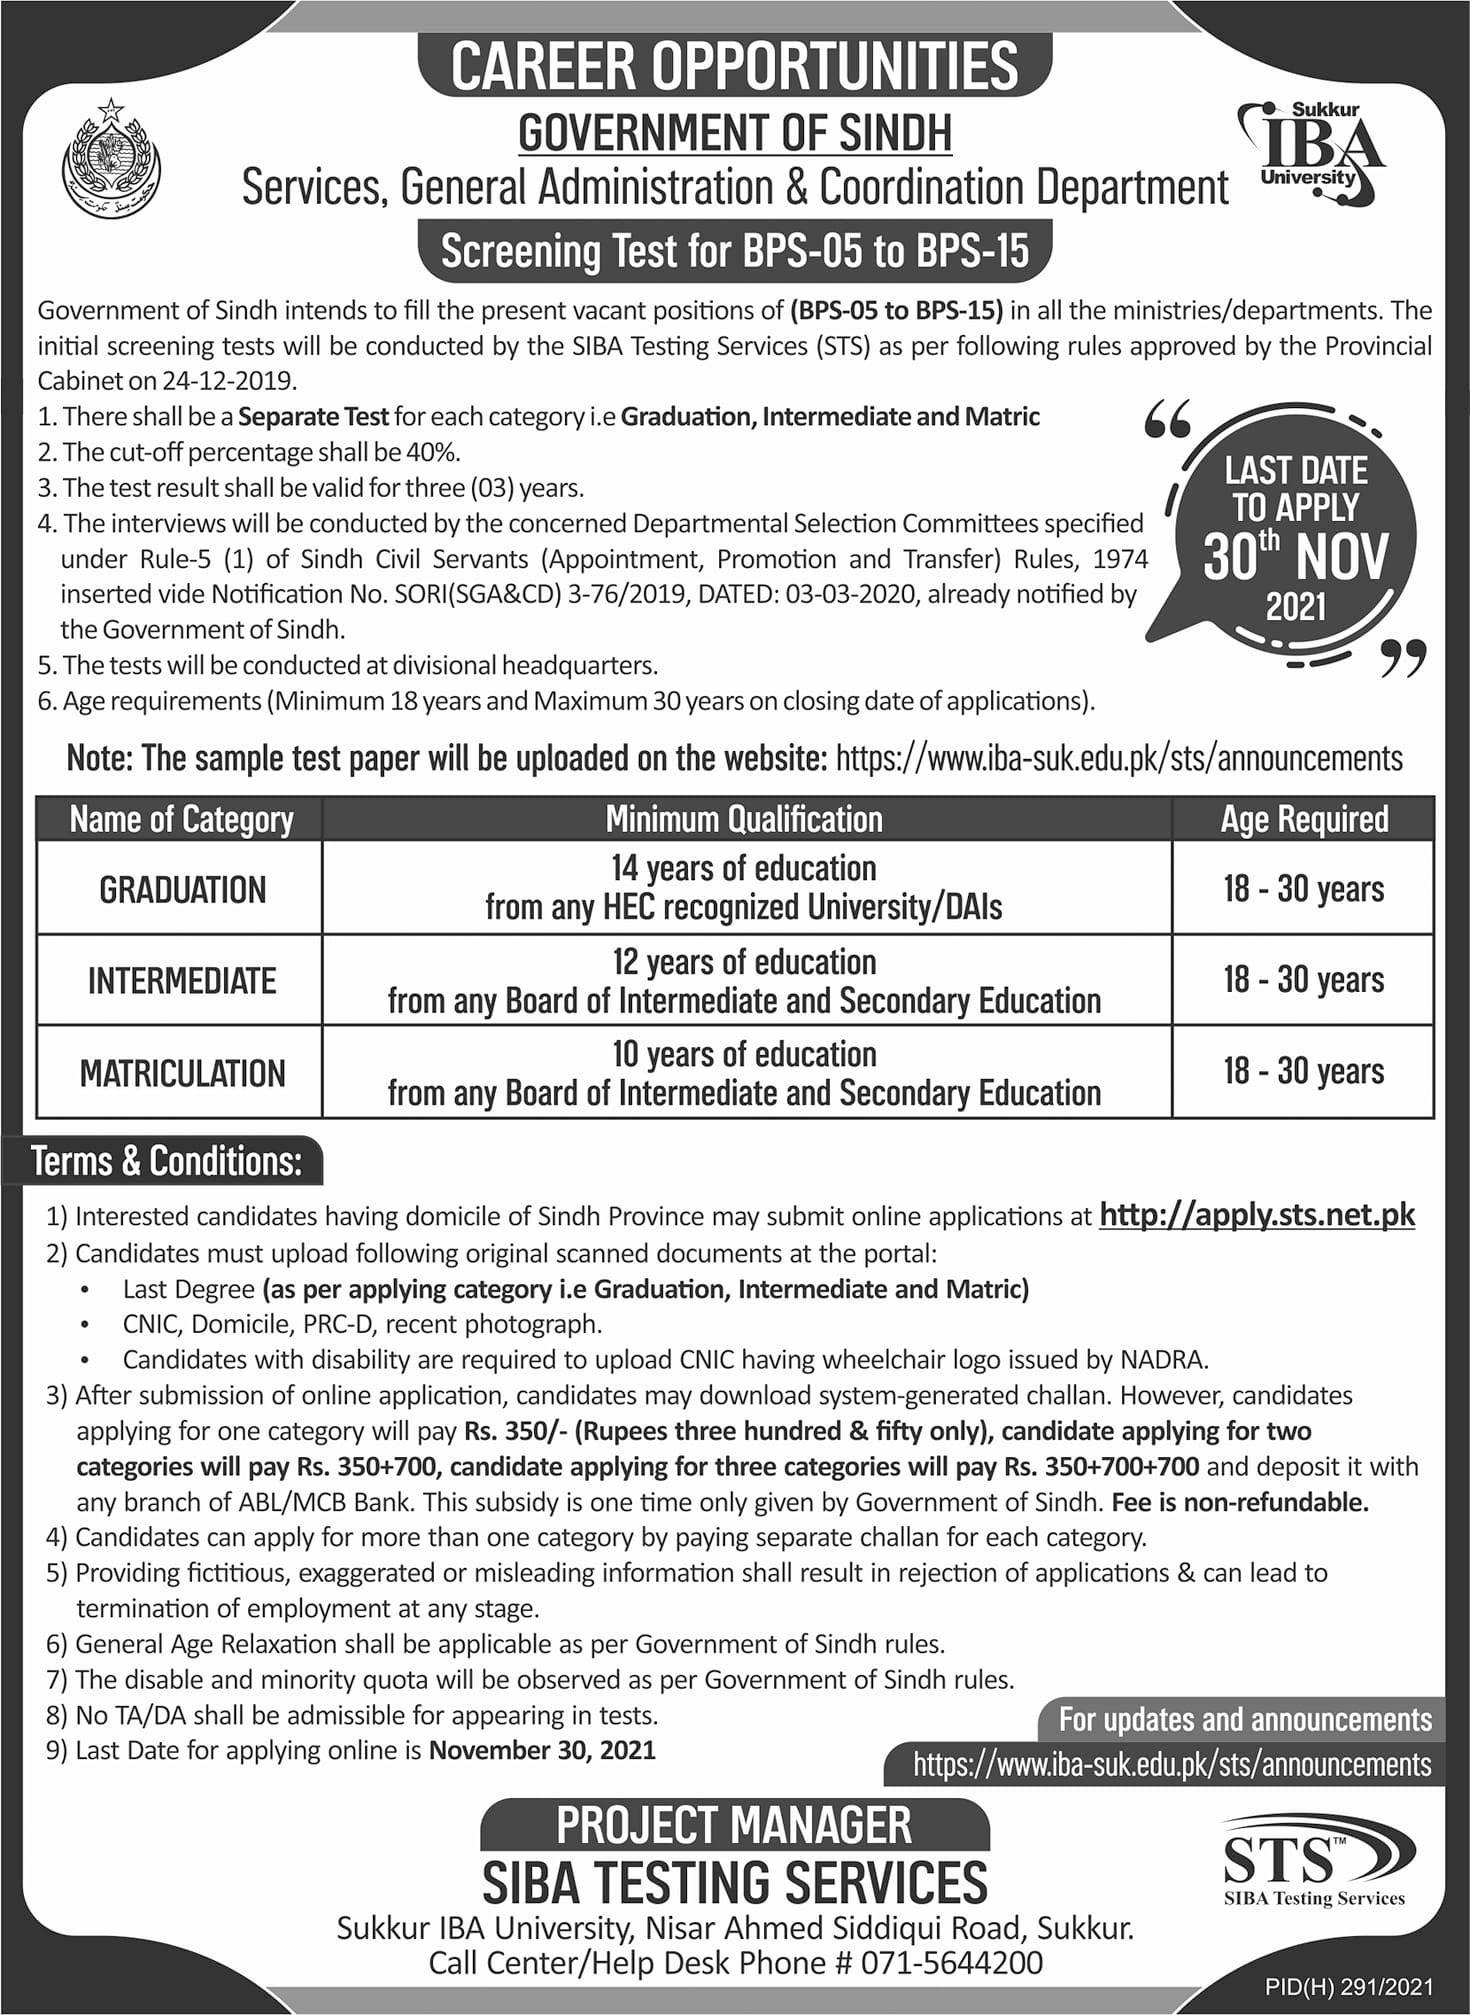 Government Of Sindh Services General Administration & Coordination Department Jobs 2021